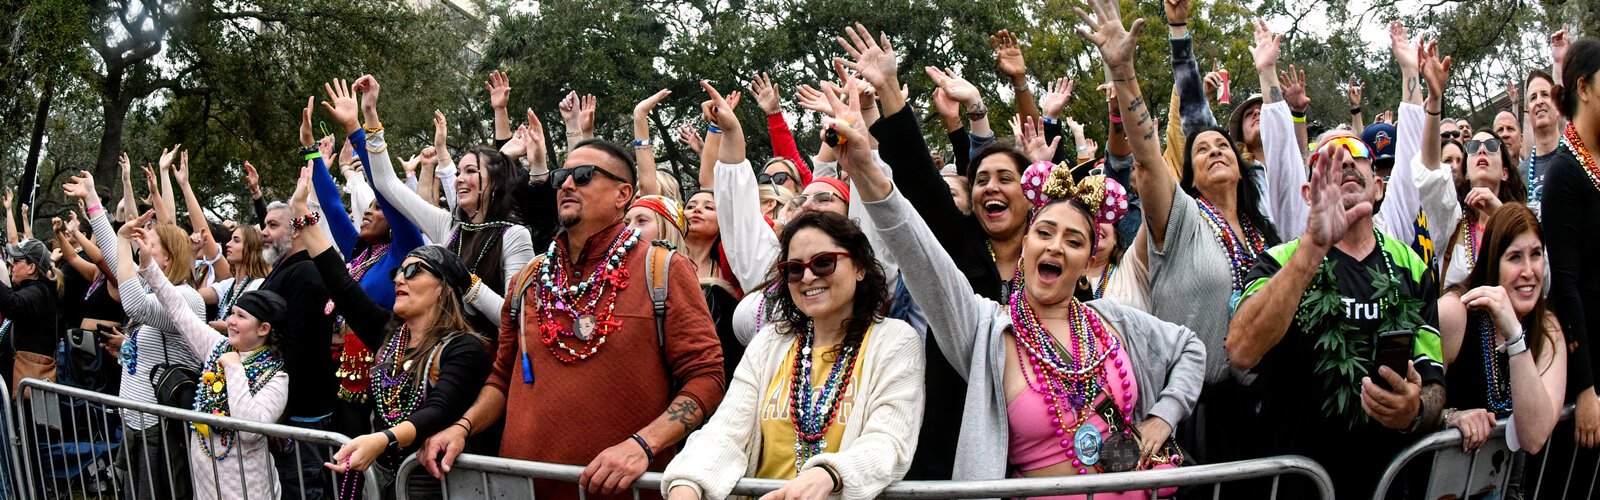 Parade goers beg excitingly for beads on Bayshore Boulevard during the 106th Gasparilla parade of pirates in Tampa.